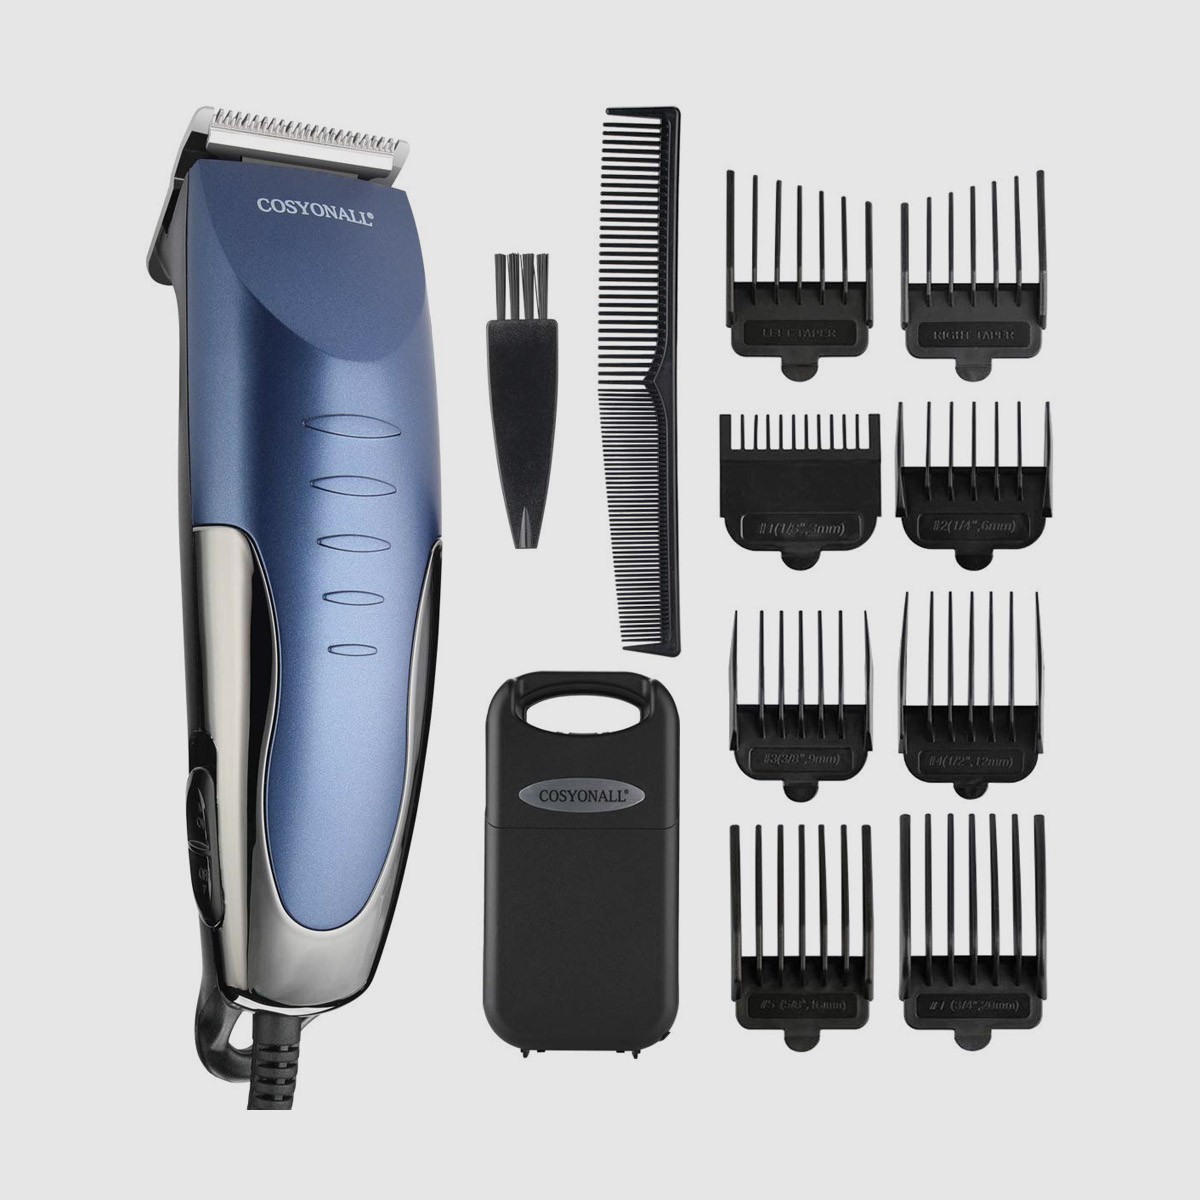 What is the difference between a hair clipper and a hair trimmer?